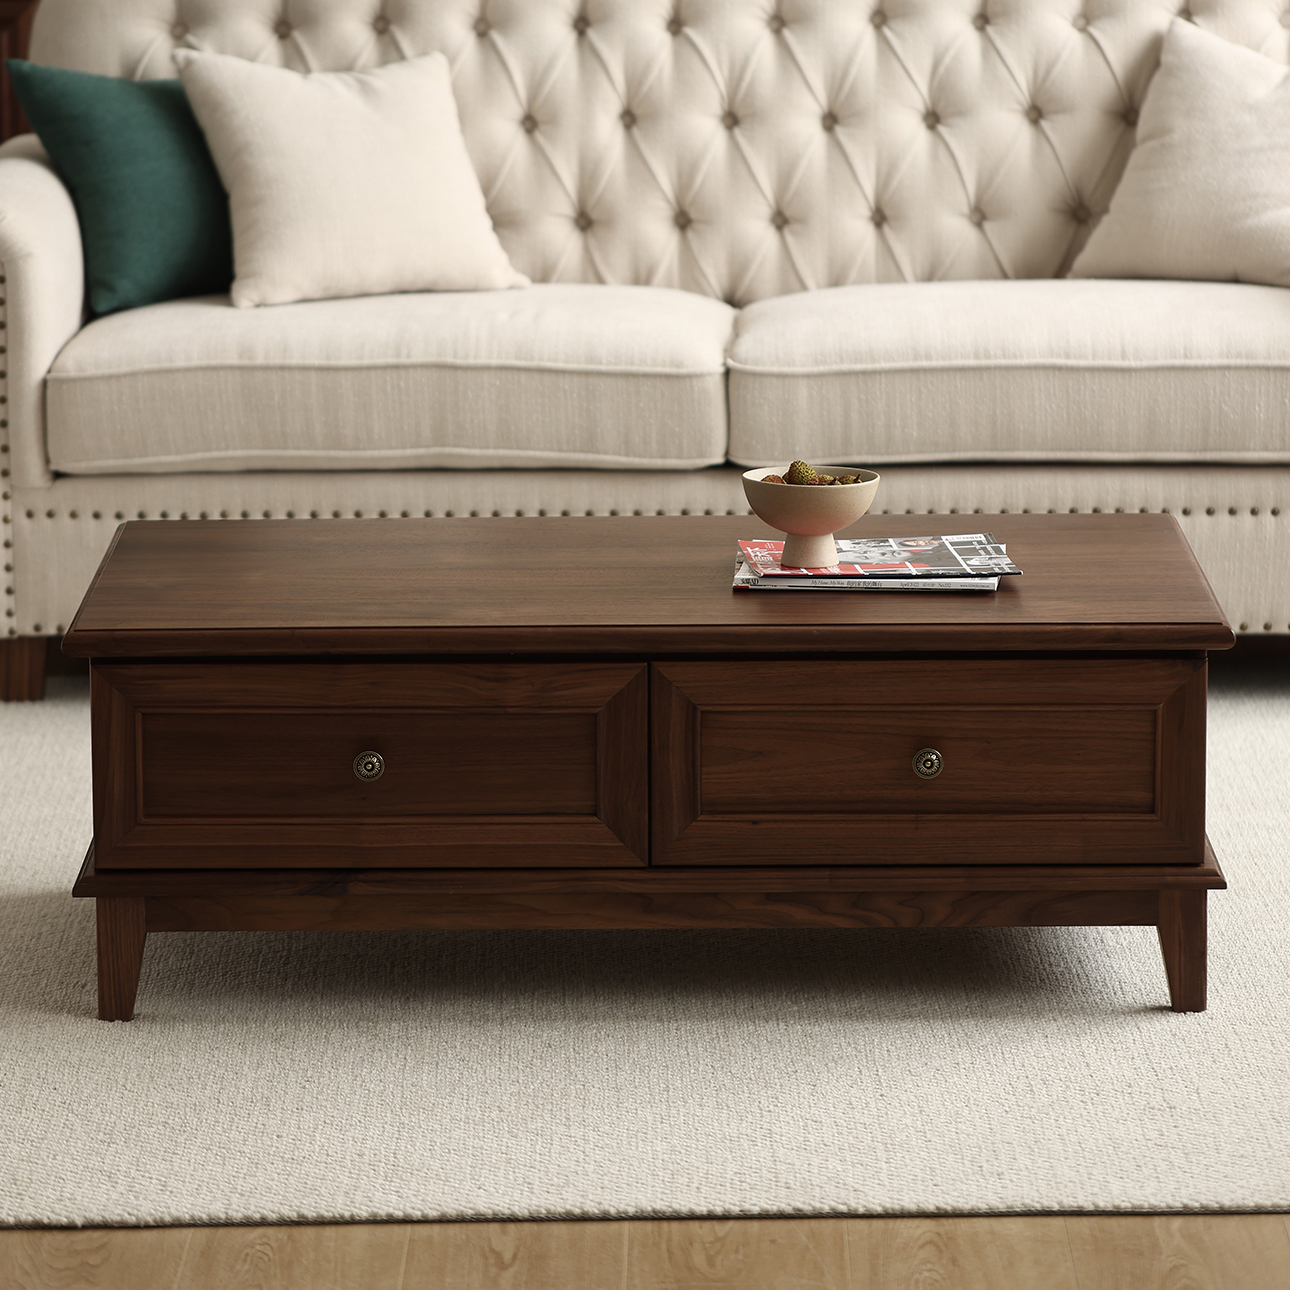 Aoseno Solid Wood Coffee Table with Drawers | Retro-Style-Afurnitek